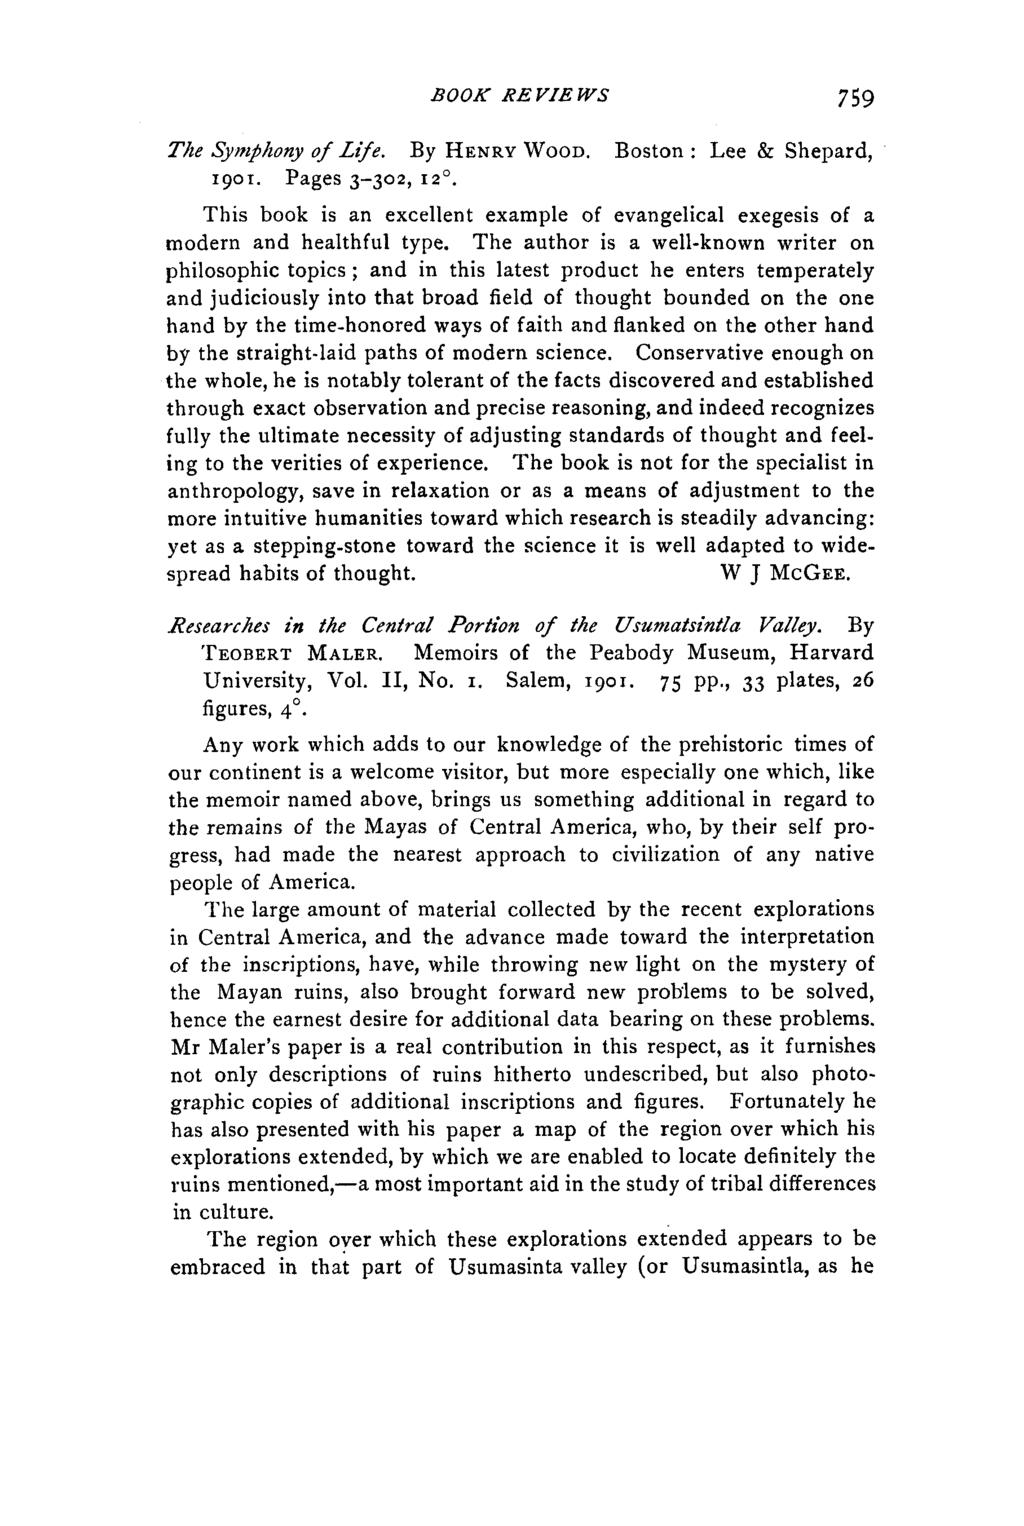 BOOK REVIEWS 759 The Syntphony of Aye. By HENRY WOOD. Boston : Lee & Shepard, 1901. Pages 3-302, 12. This book is an excellent example of evangelical exegesis of a modern and healthful type.